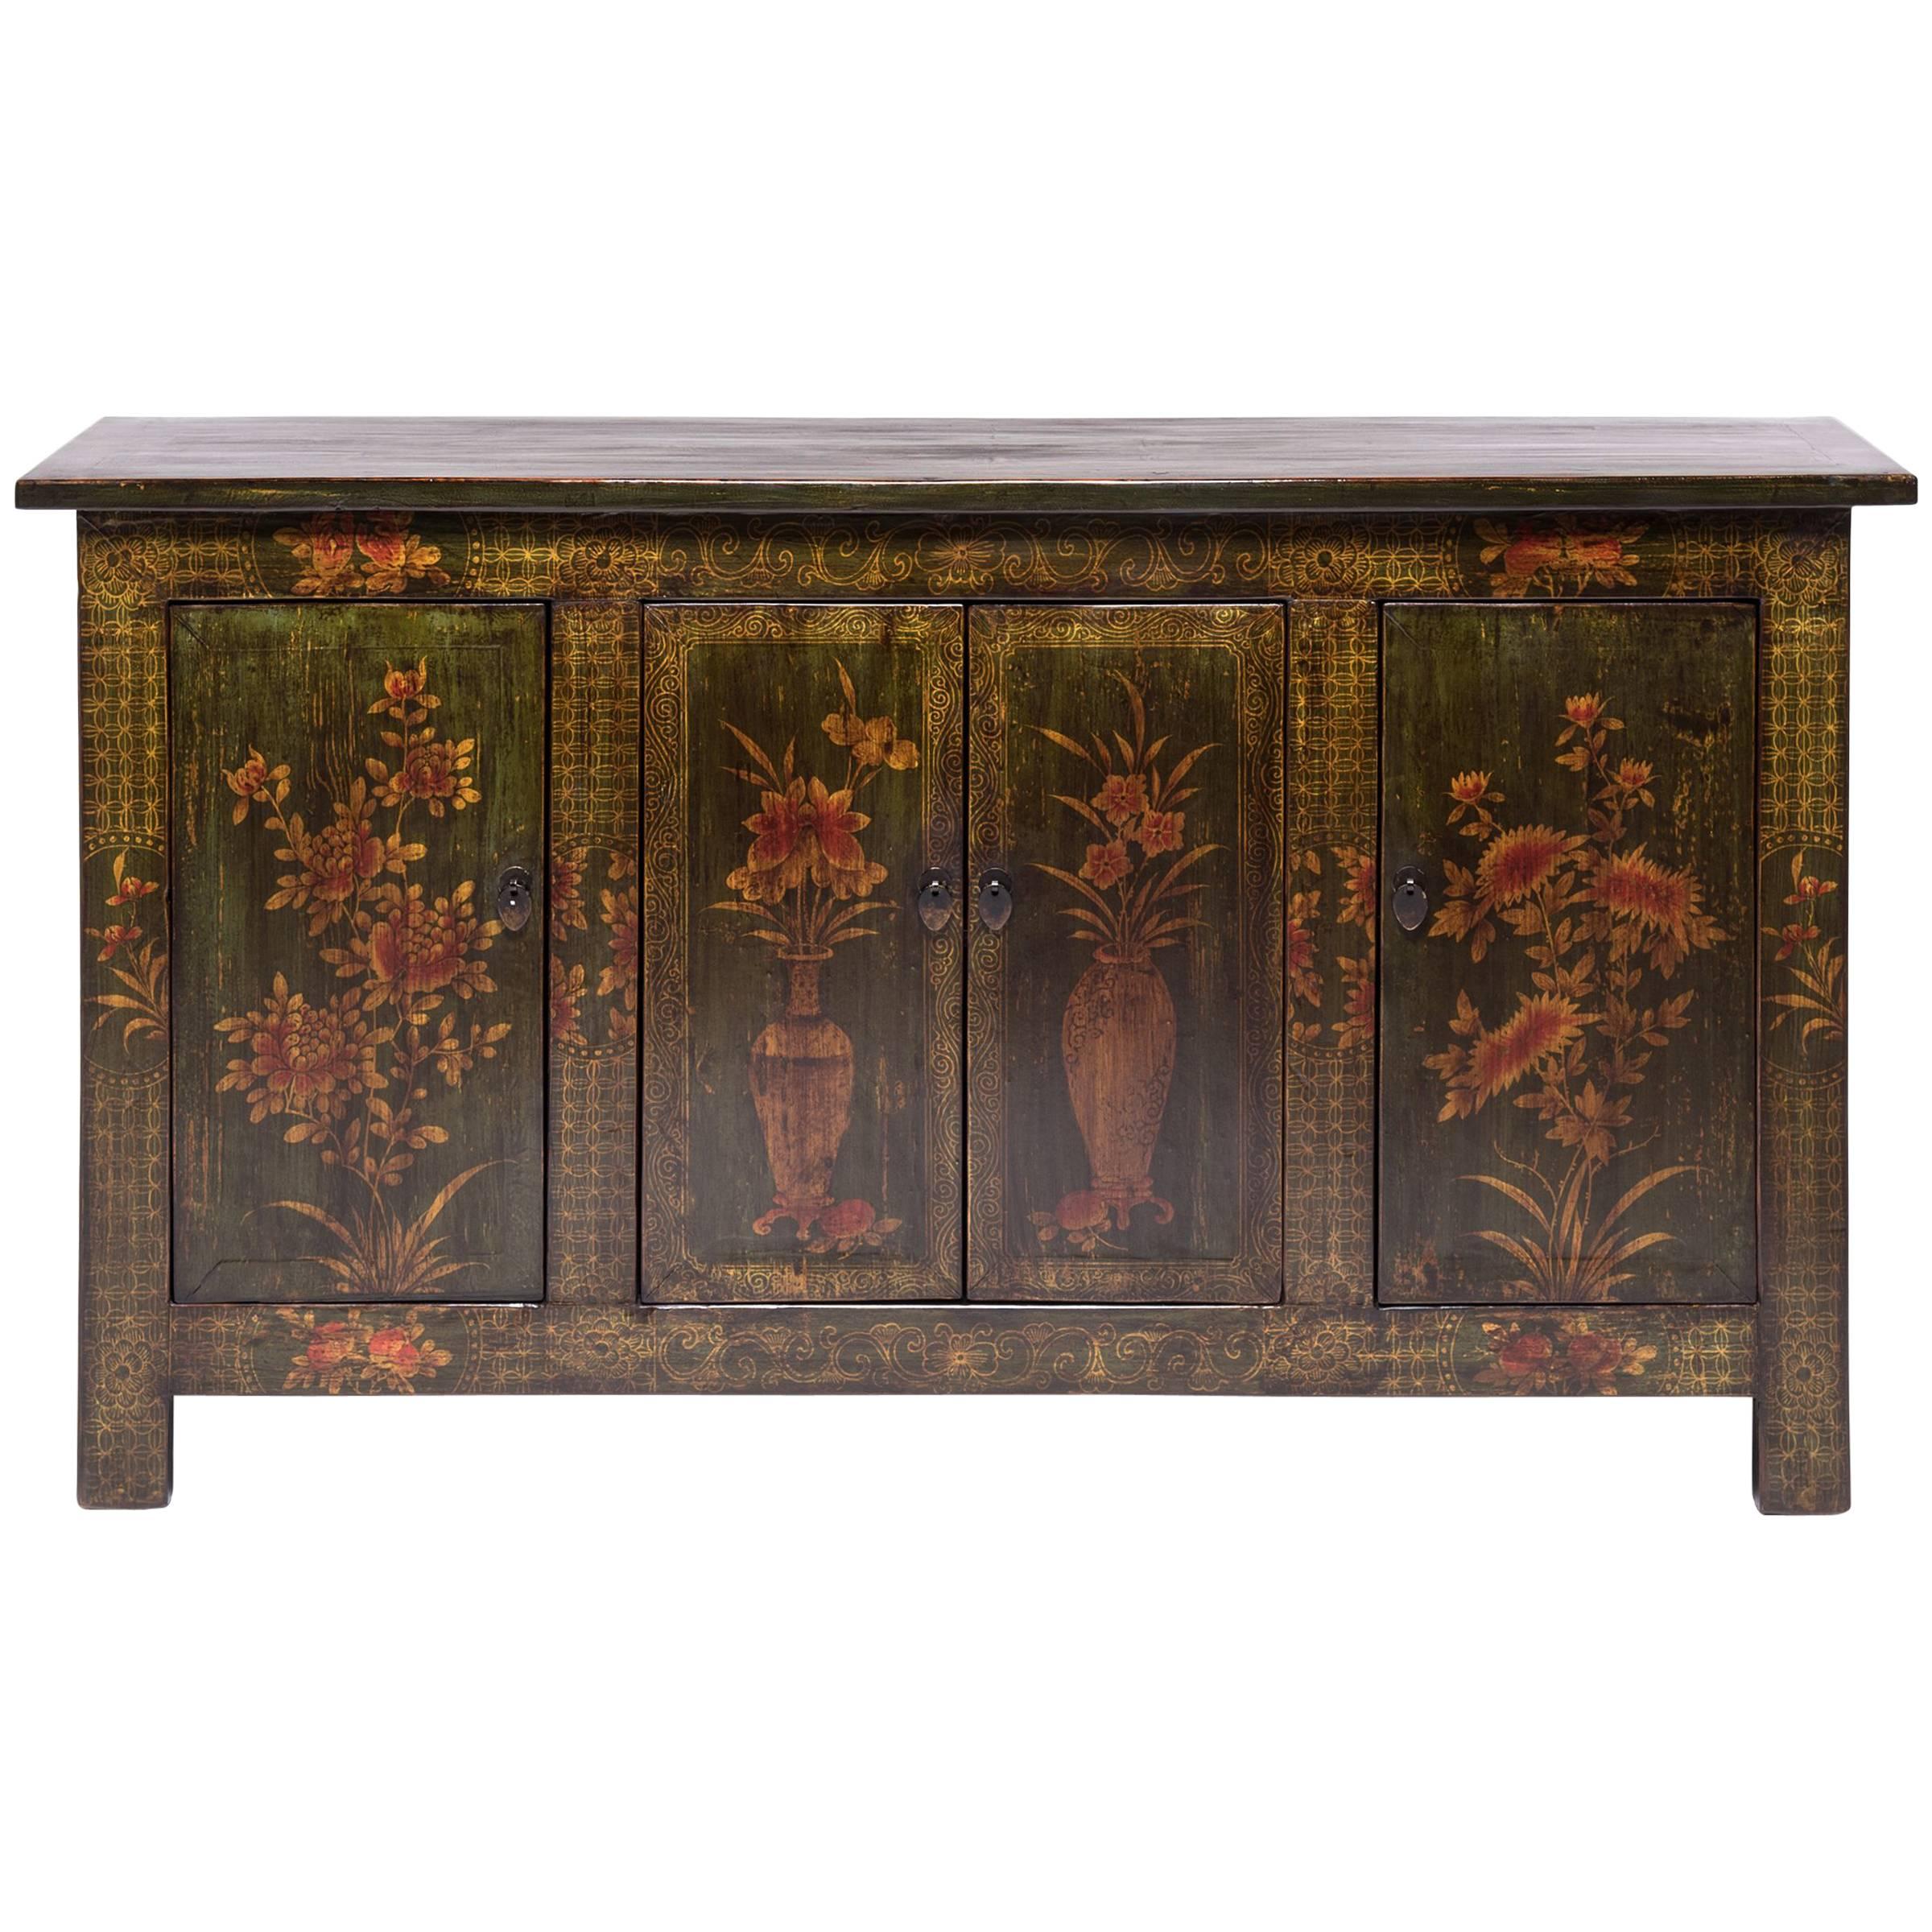 Early 20th Century Mongolian Floral Painted Coffer